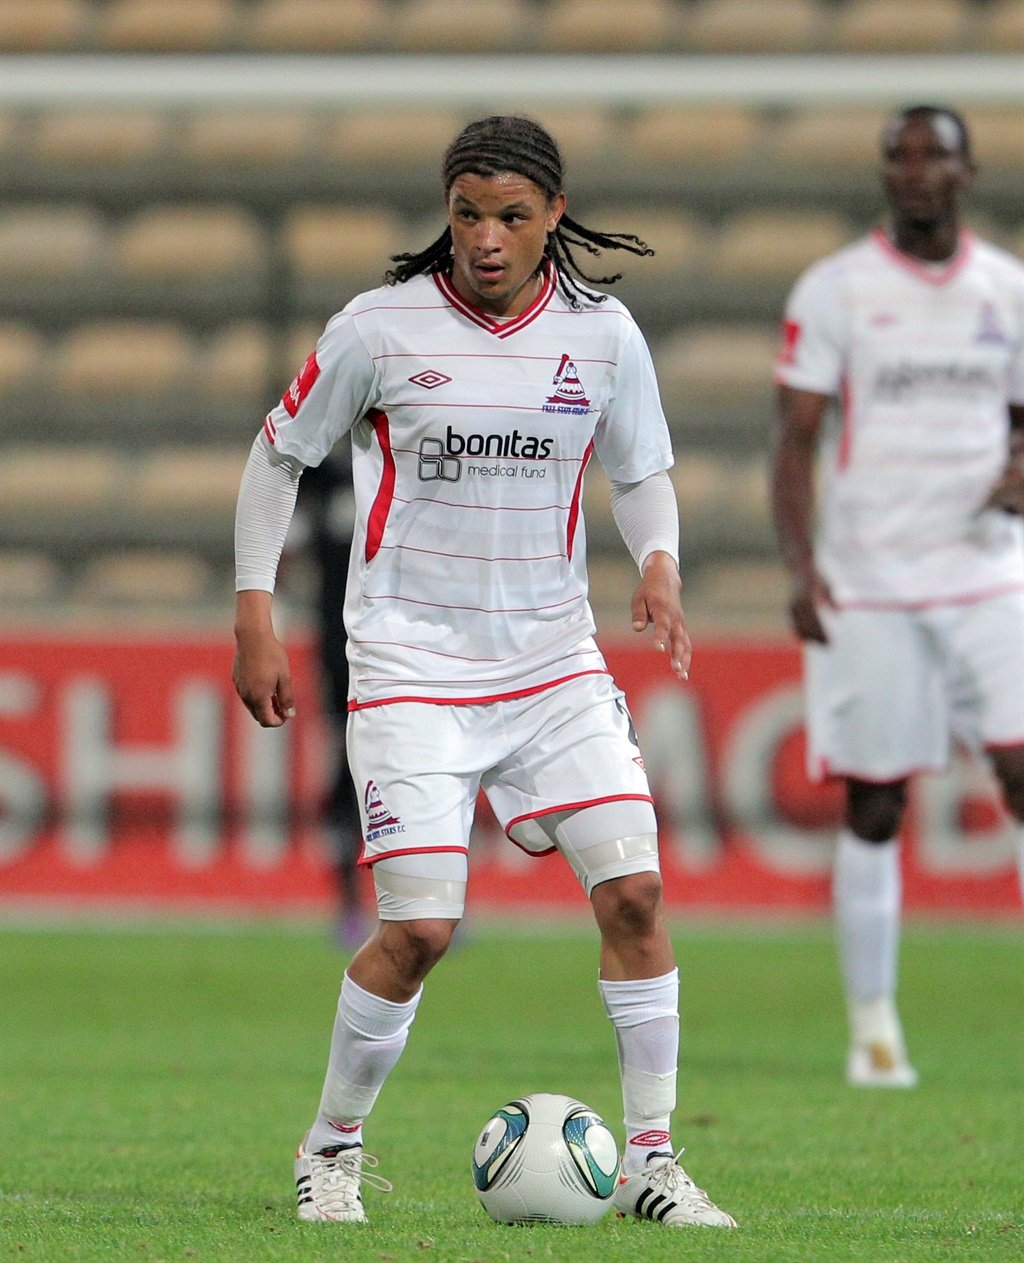 CAPE TOWN, SOUTH AFRICA - MAY 02, Coldrin Coetzee from Free State Stars during the Absa Premiership match between Santos and Free State Stars at Athlone Stadium on May 02, 2012 in Cape Town, South Africa